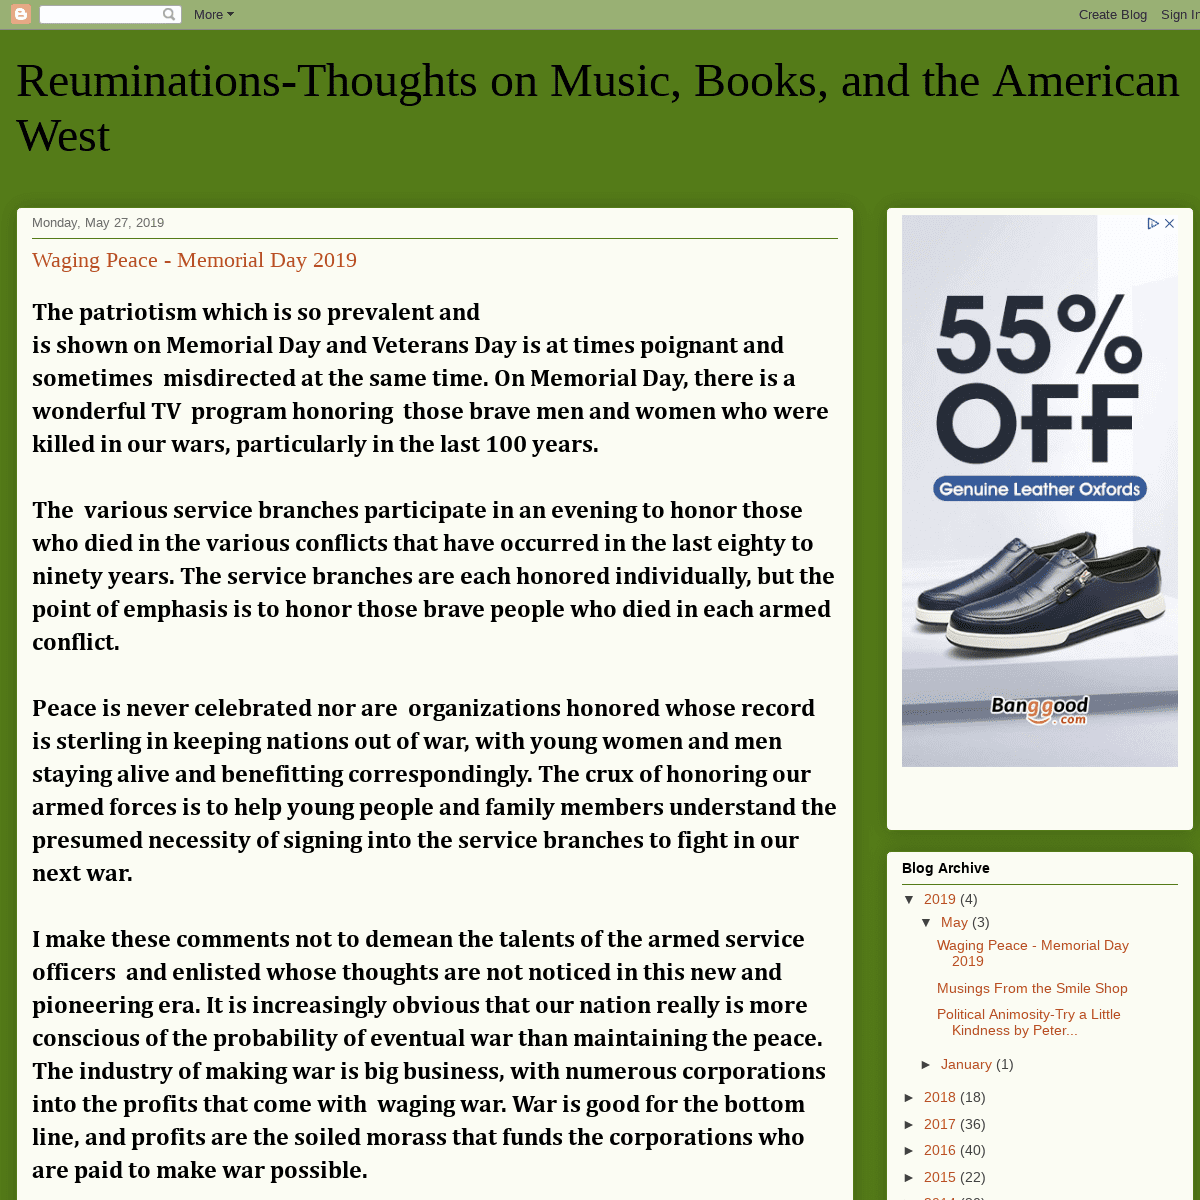 Reuminations-Thoughts on Music, Books, and the American West